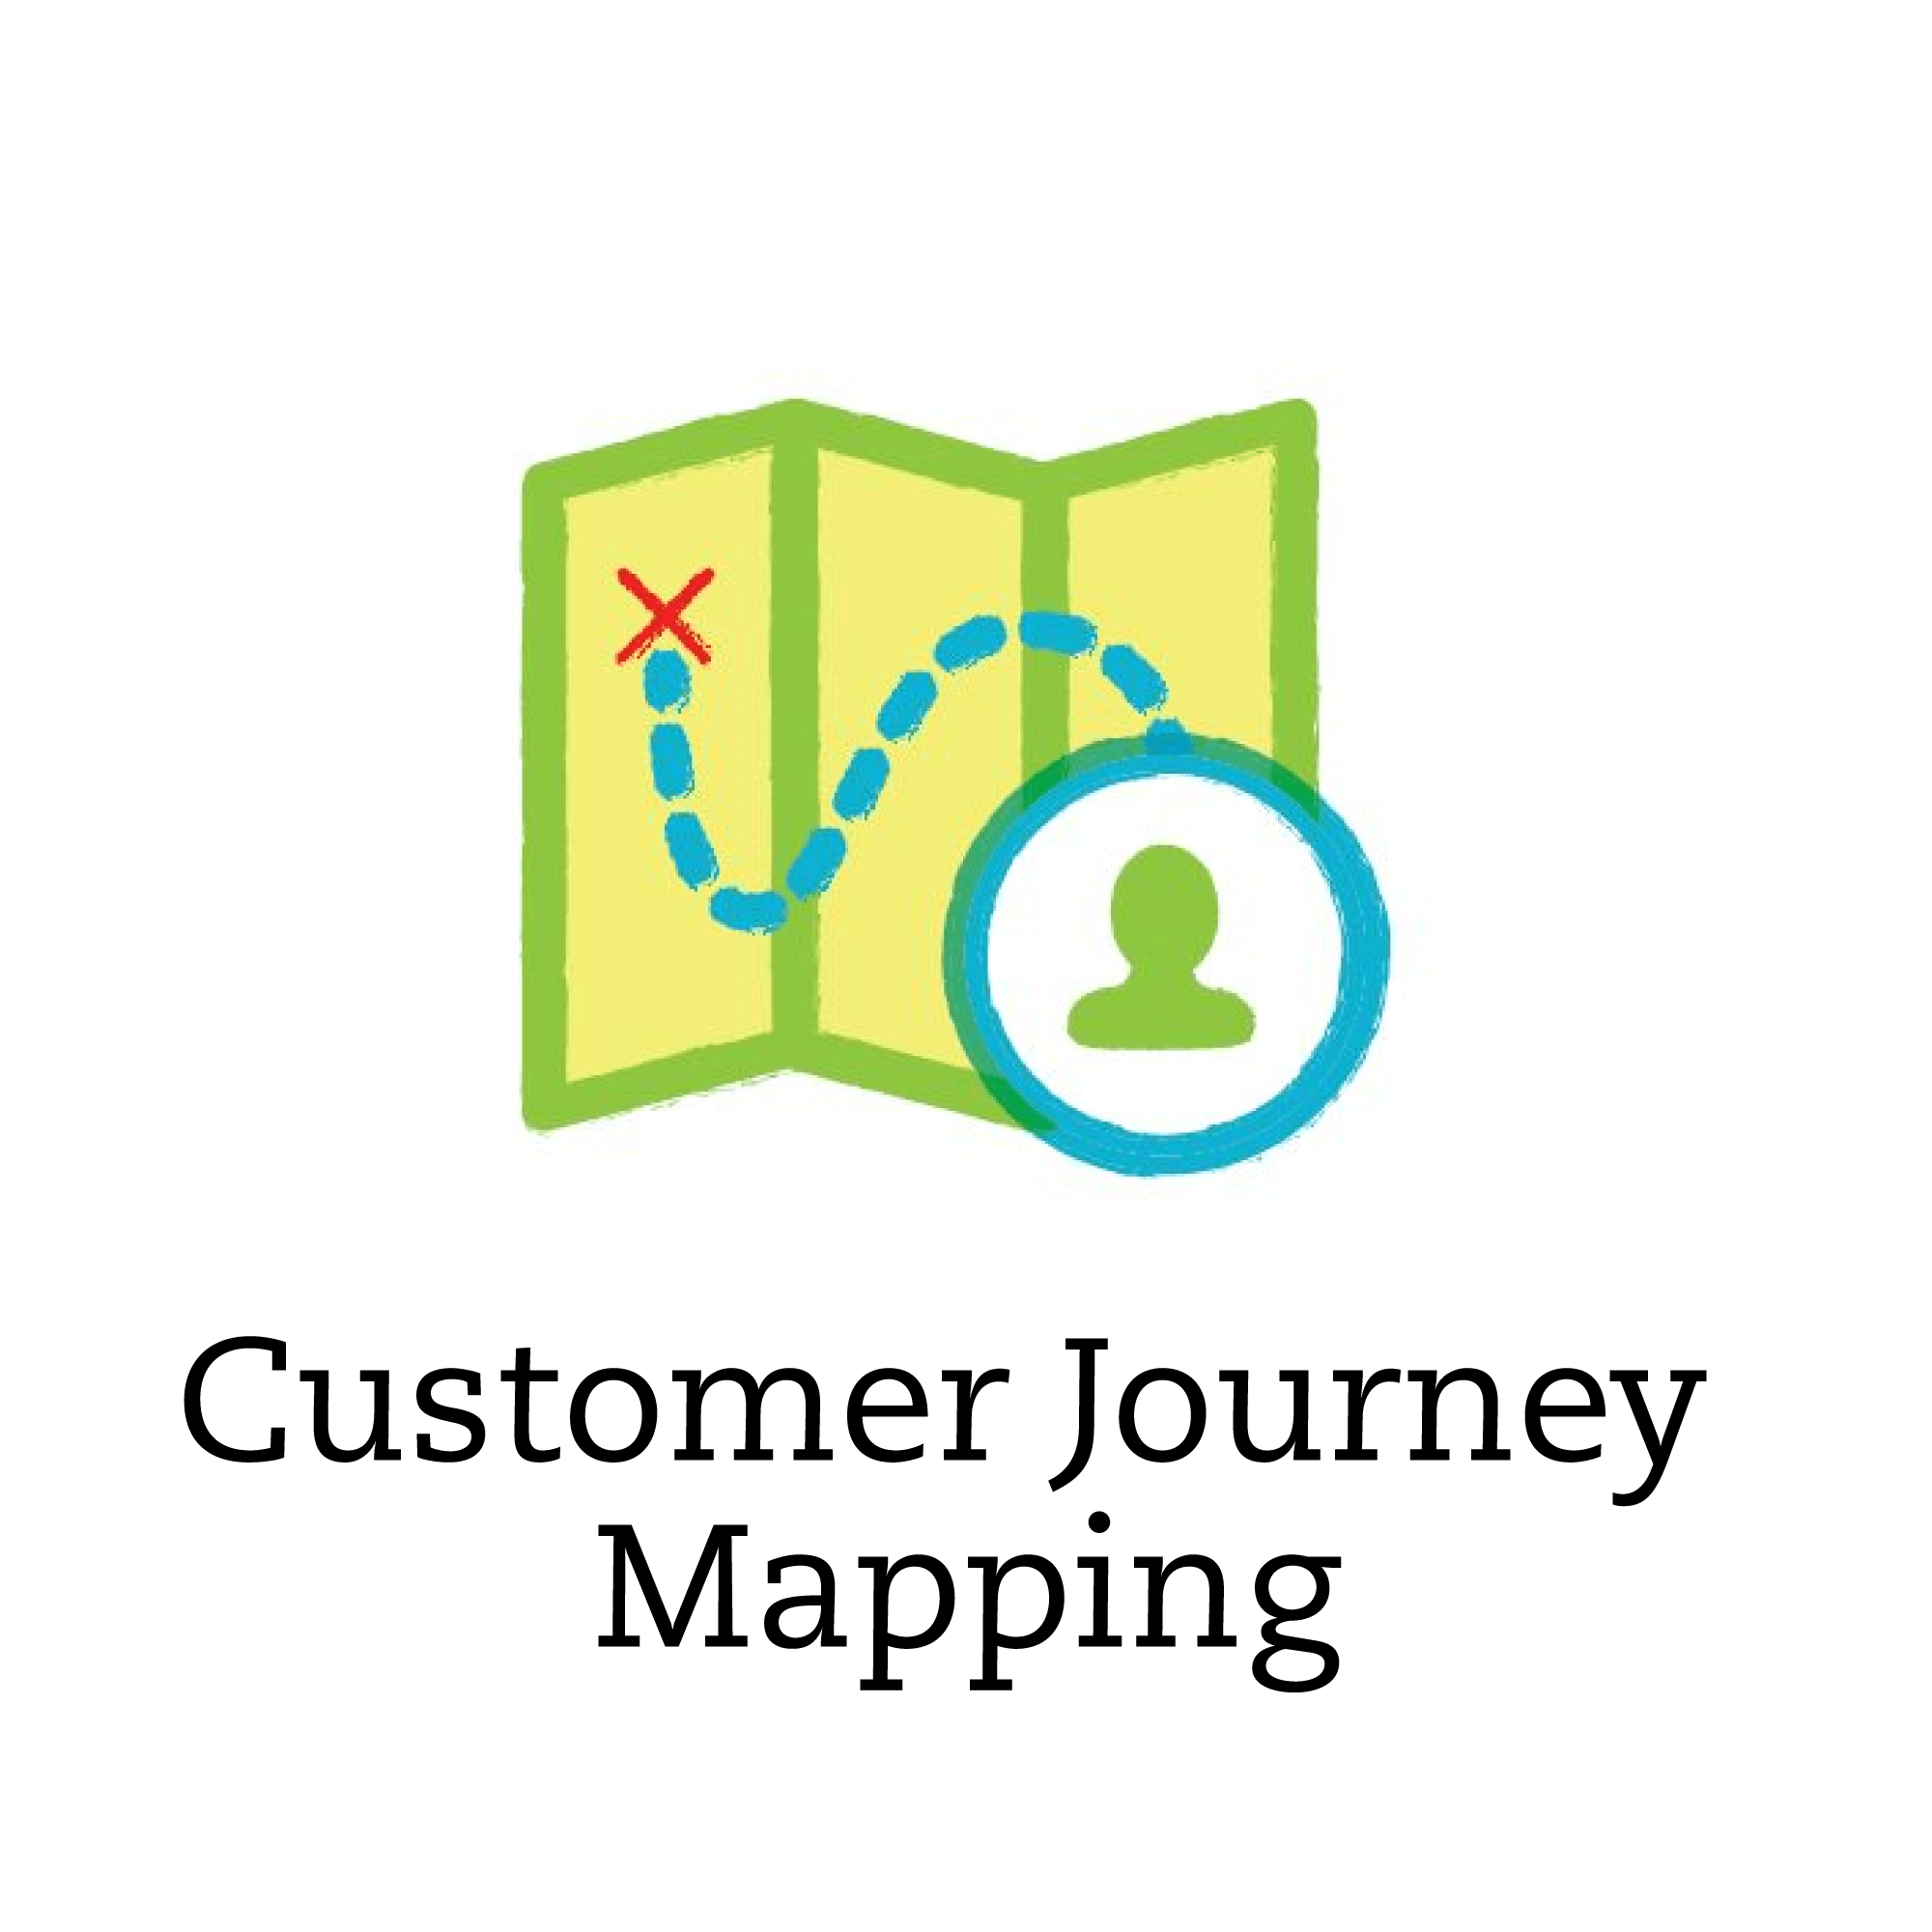 Introduction to Customer Journey Mapping (9 Dec 21)